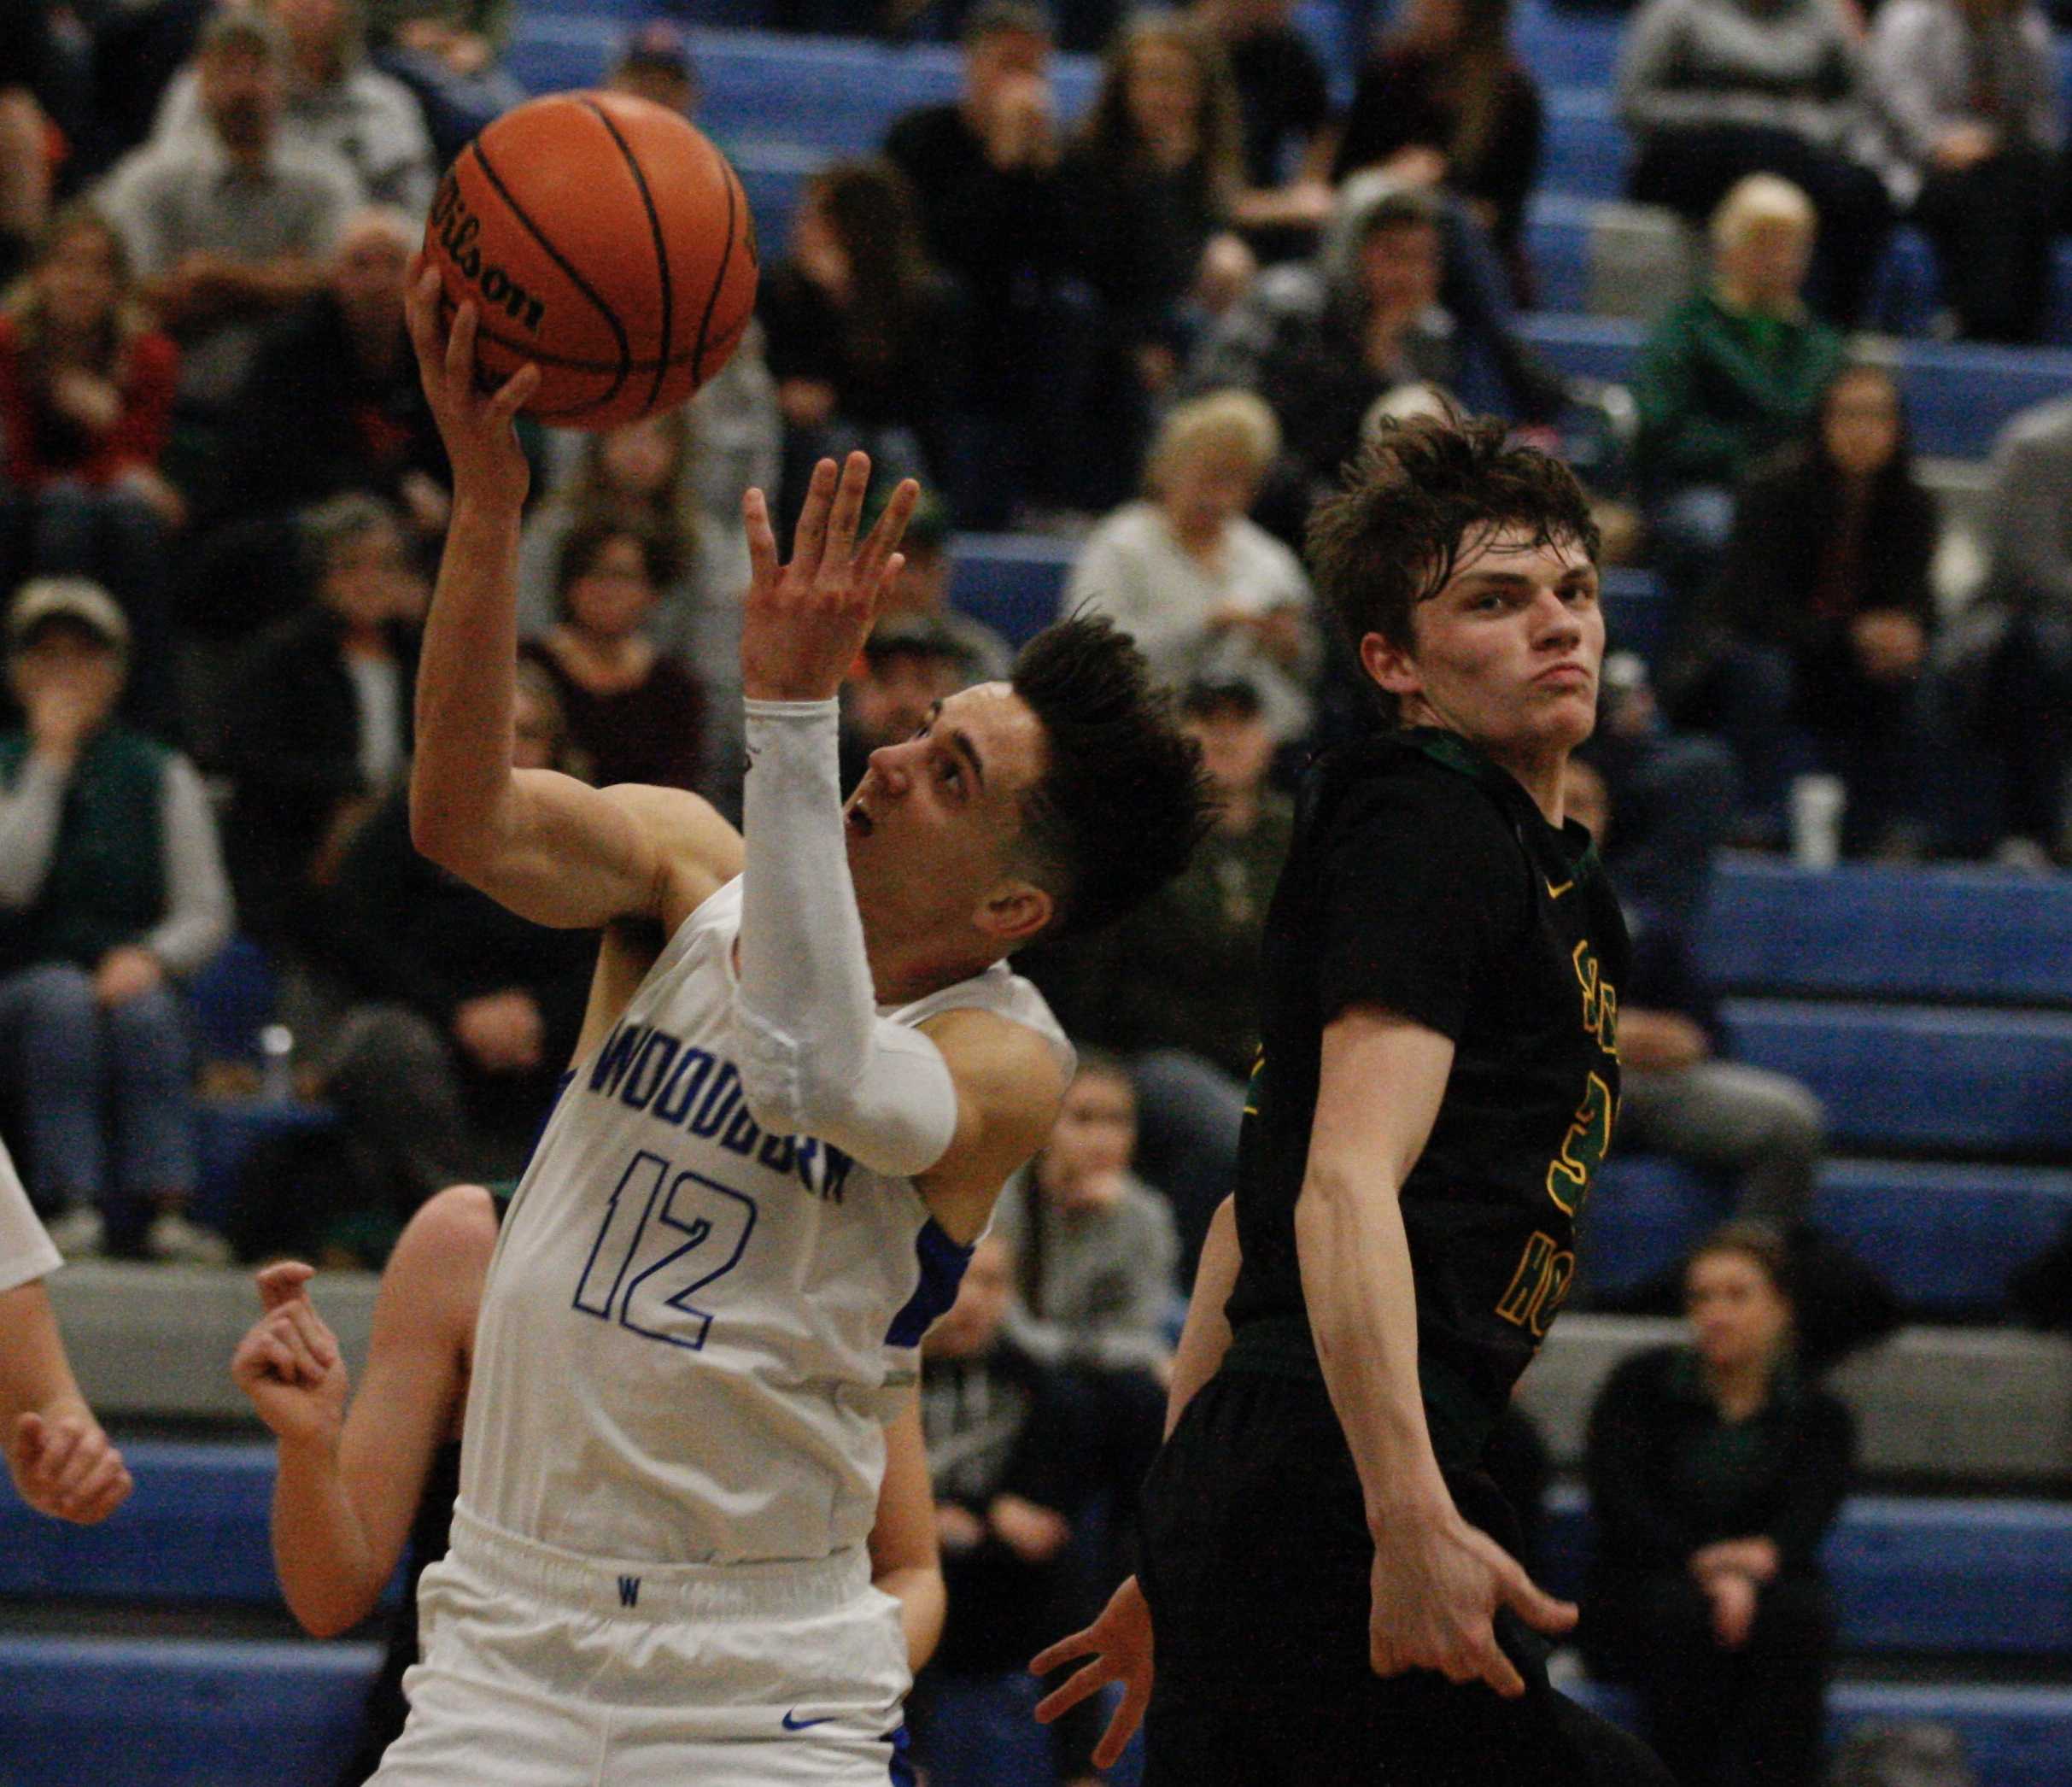 Woodburn's R.J. Veliz corkscrews past Sweet Home's Jake Swanson for two of his game high 23 points. (Photo by Norm Maves Jr.)